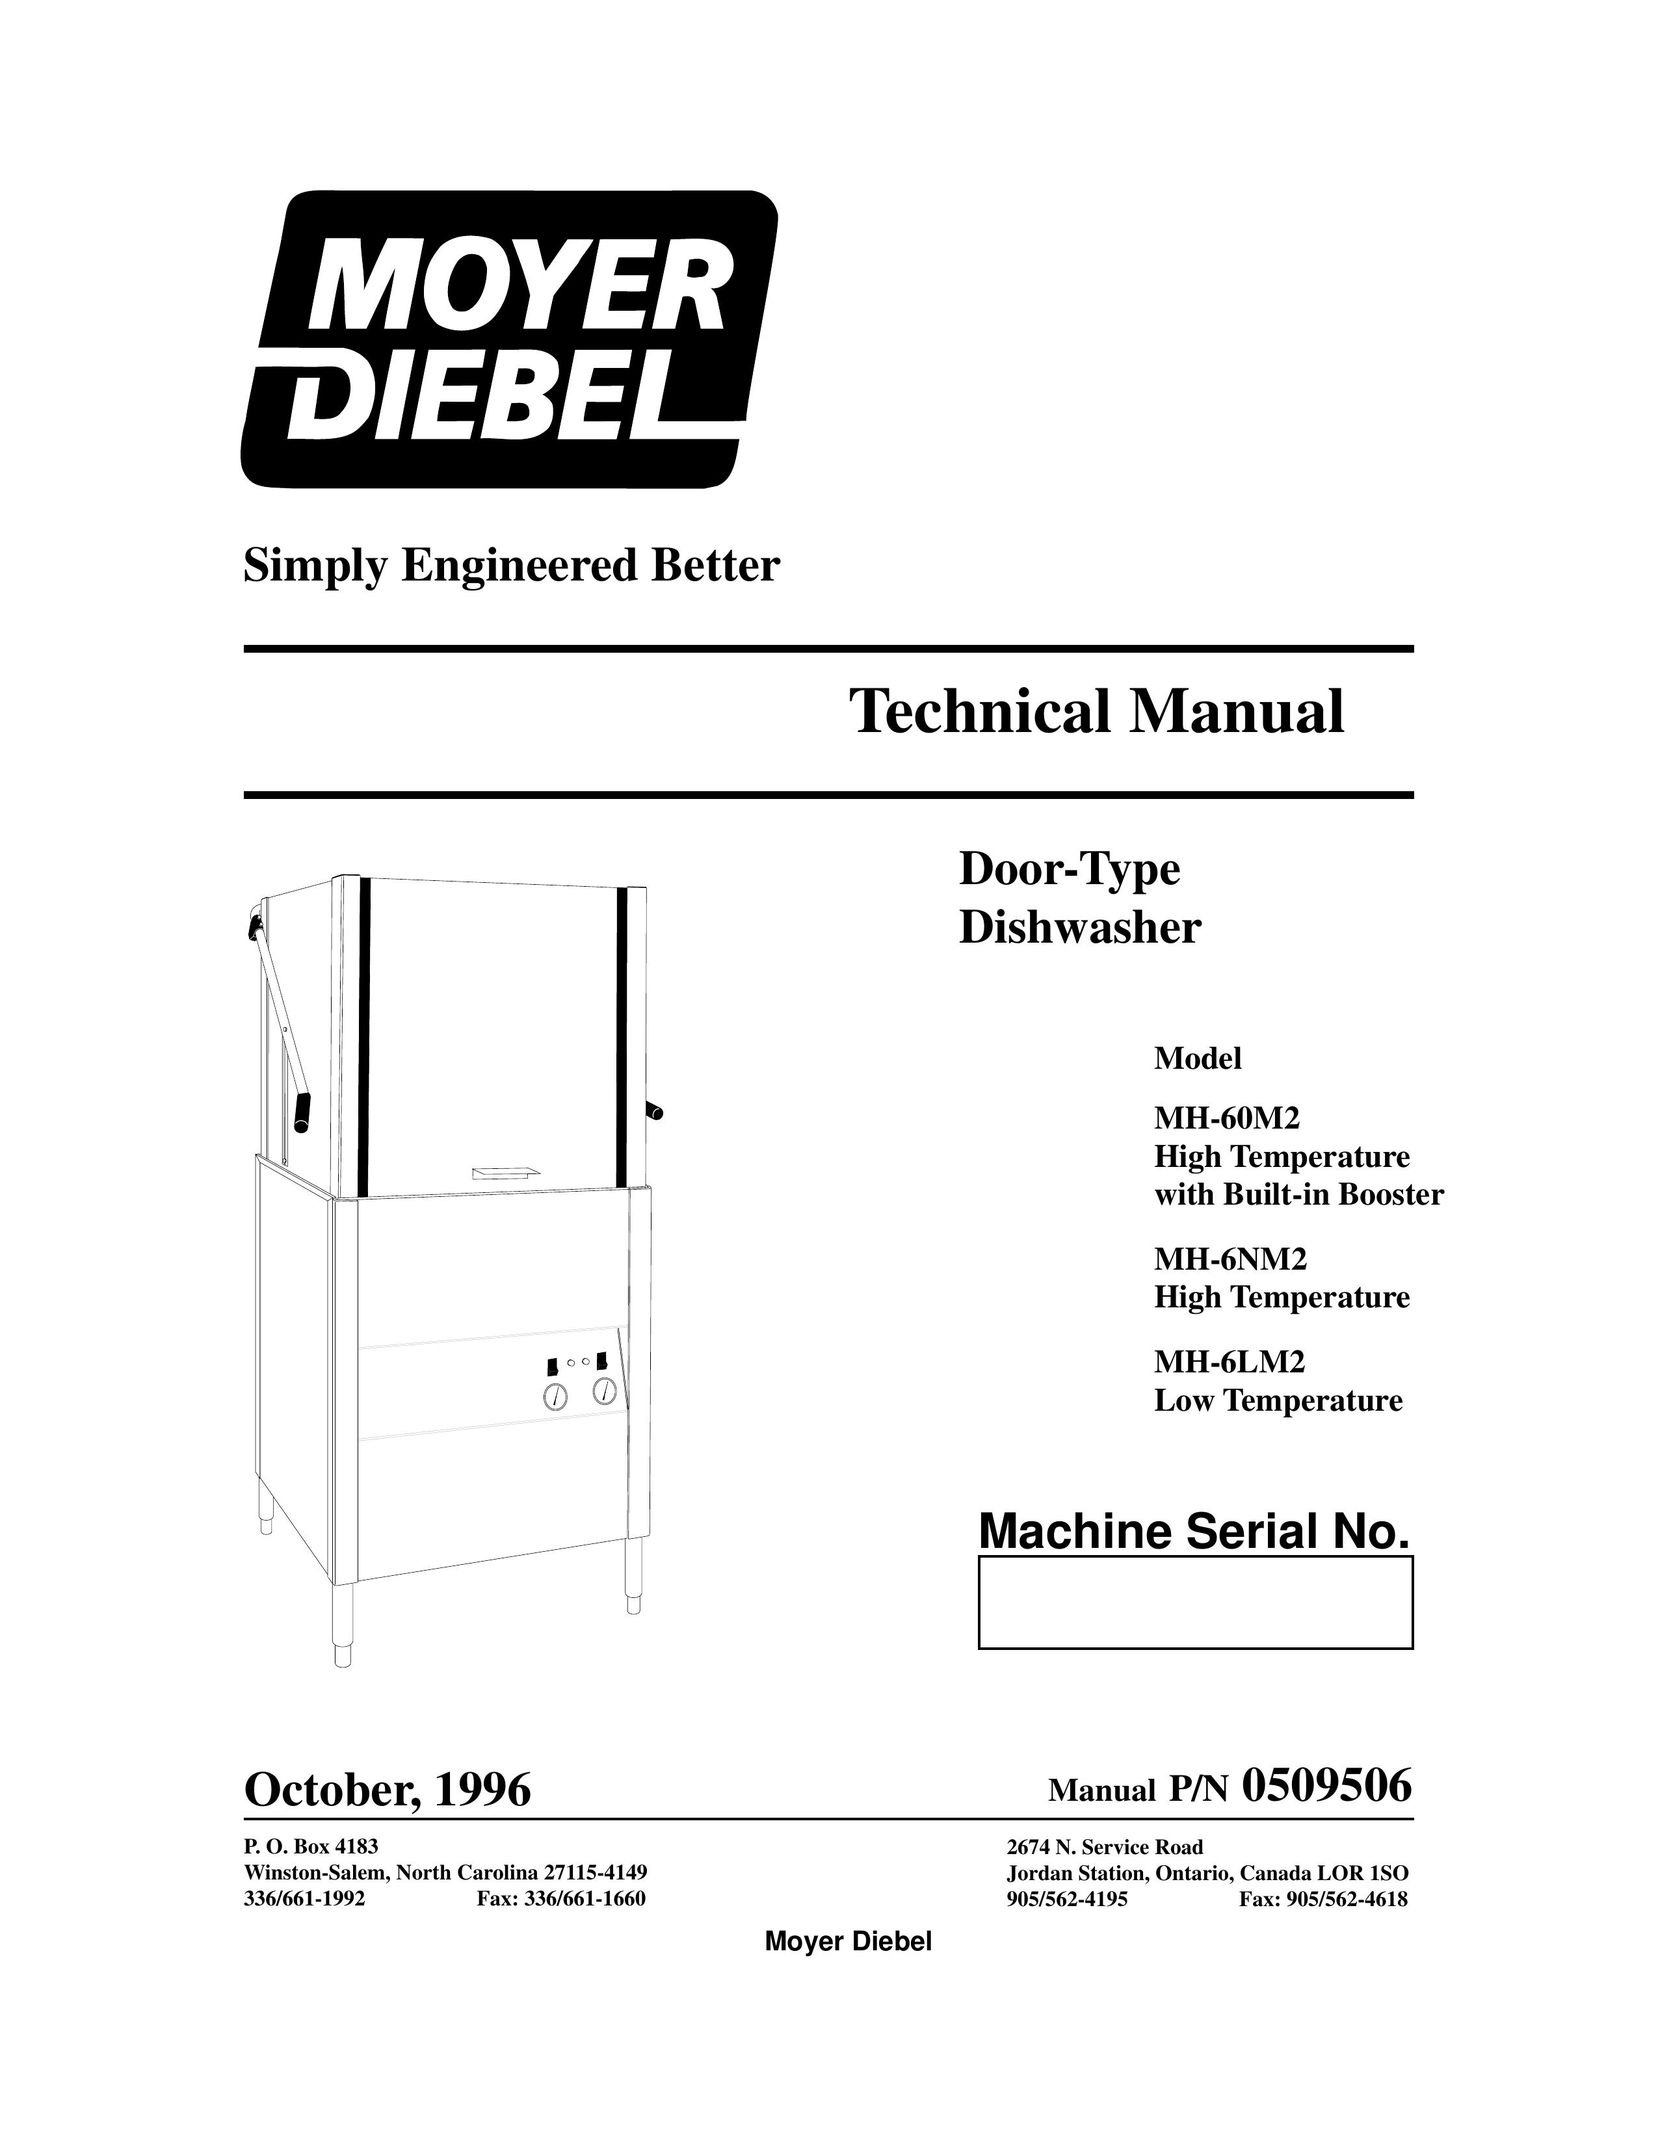 Moyer Diebel MH-6LM2 Dishwasher User Manual